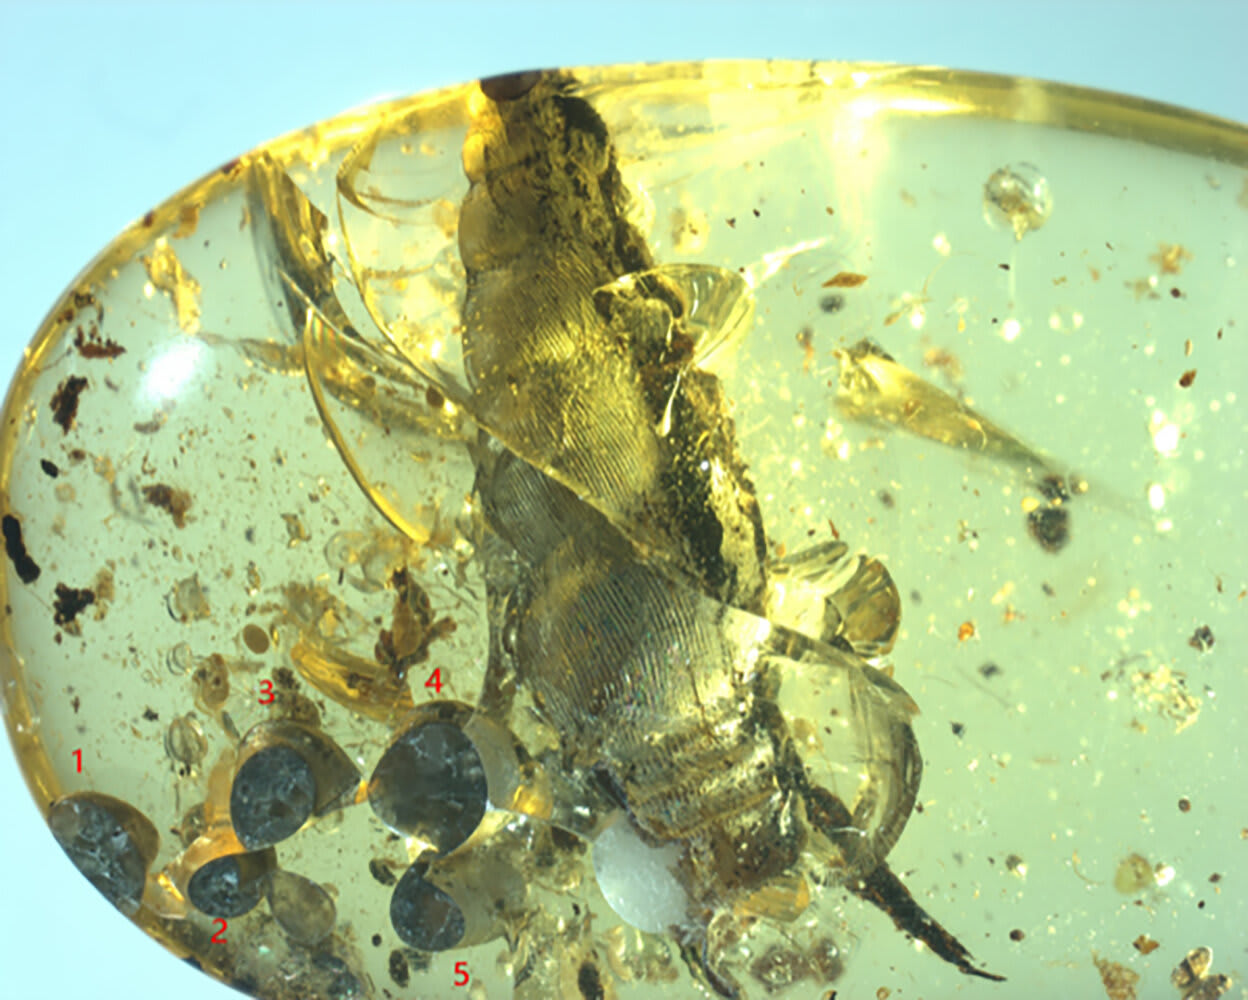 99-million-year-old snail fossilized in amber while giving birth